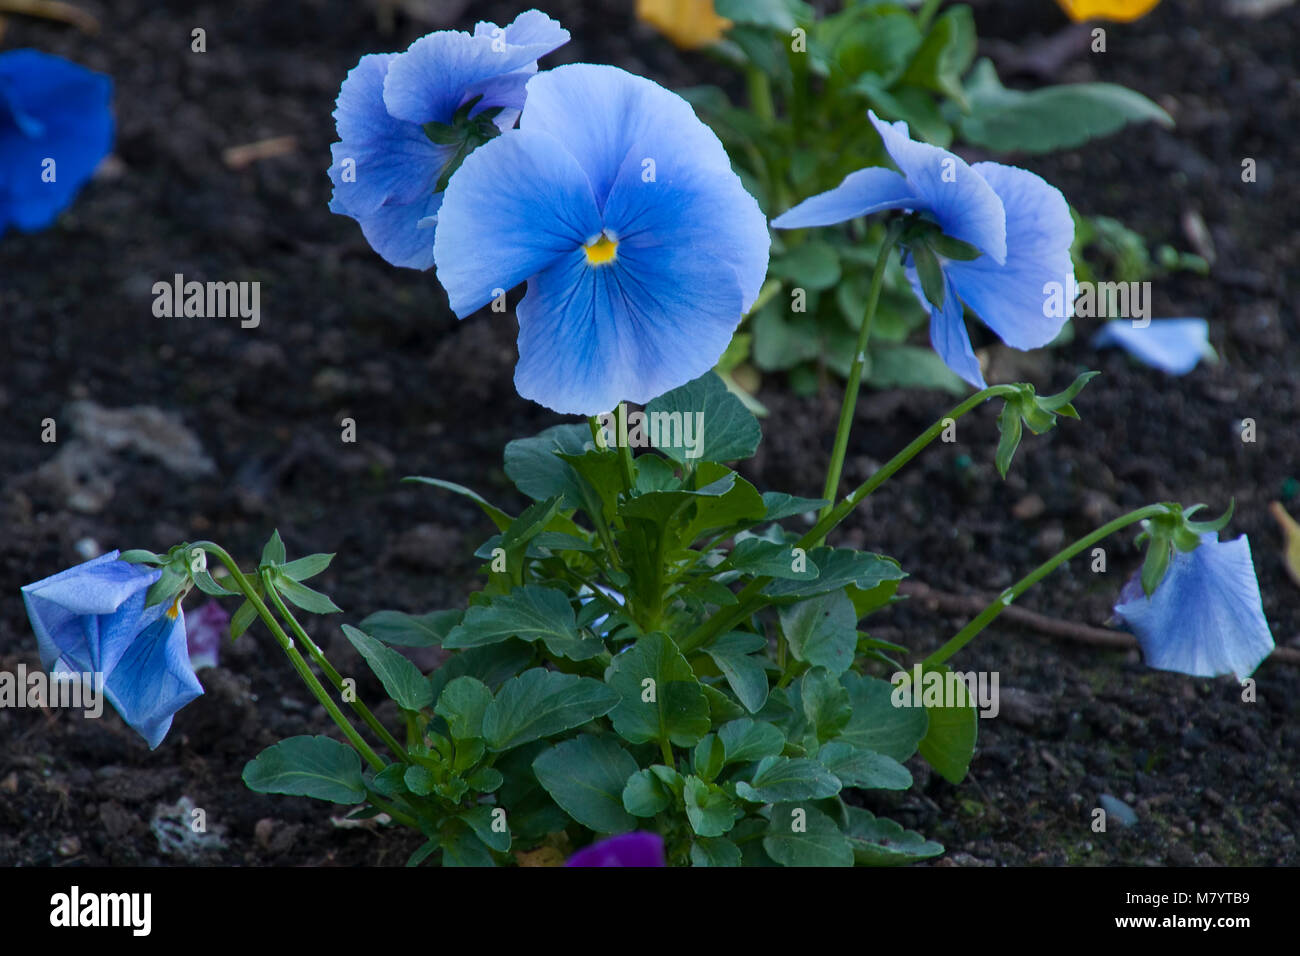 Sydney Australia, flowerbed with blue pansy plant Stock Photo